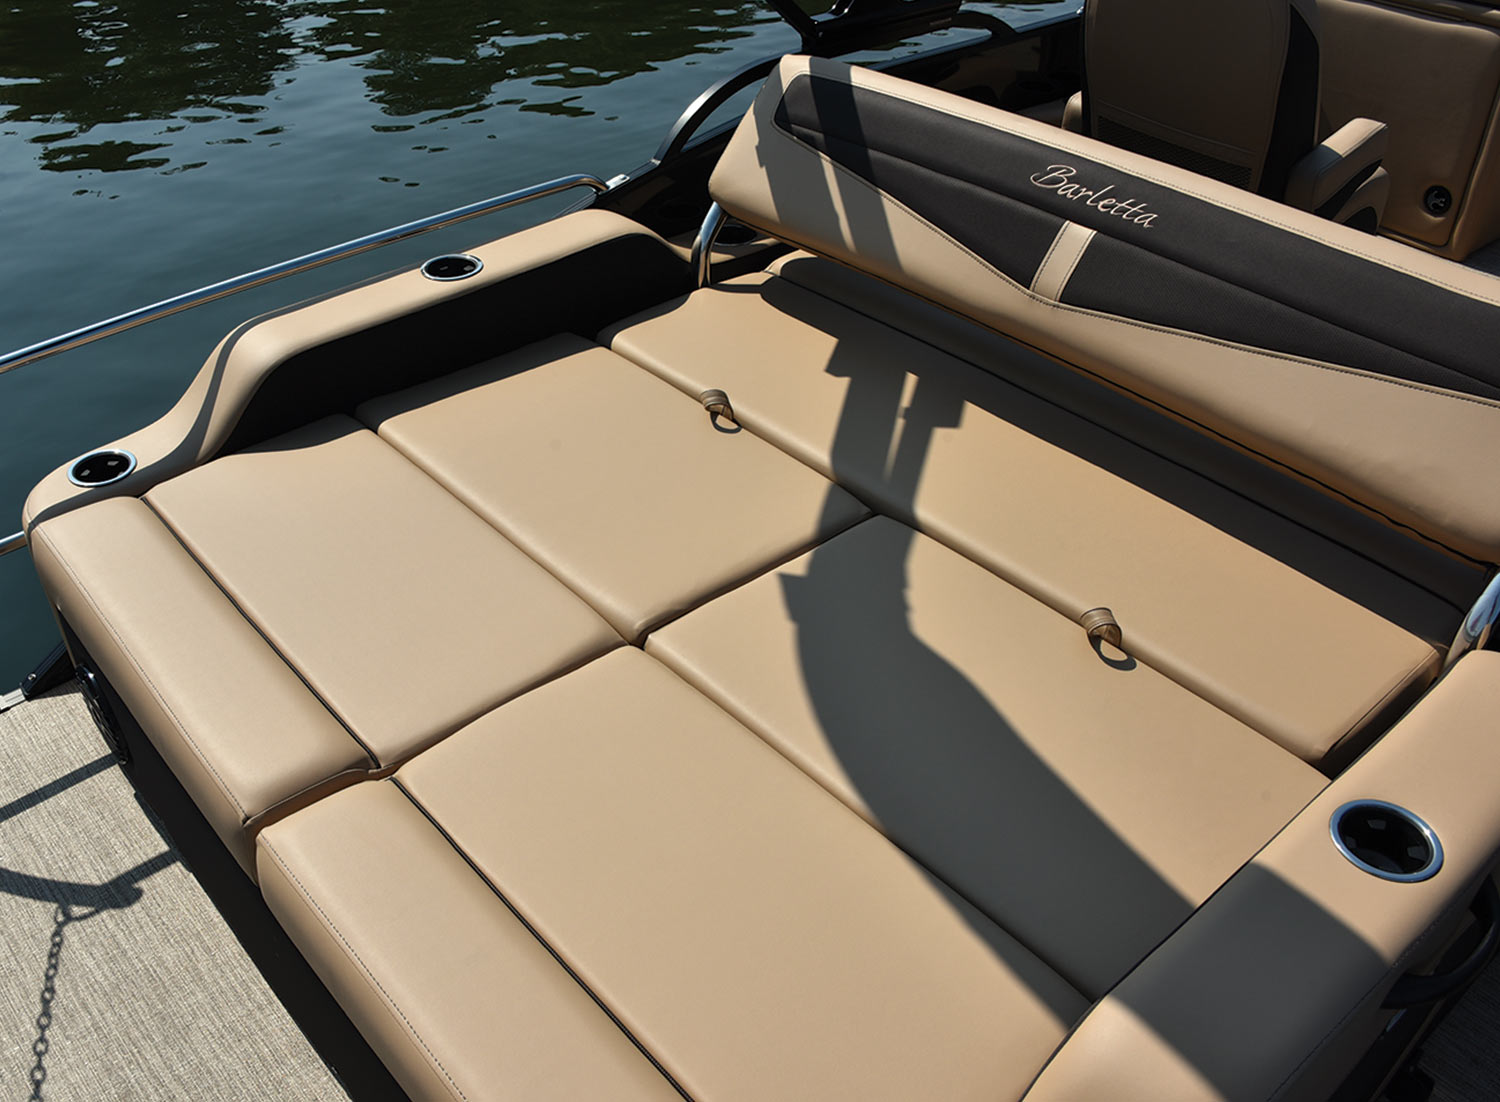 a wide passenger chase lounge on the Barletta Cabrio 22UC